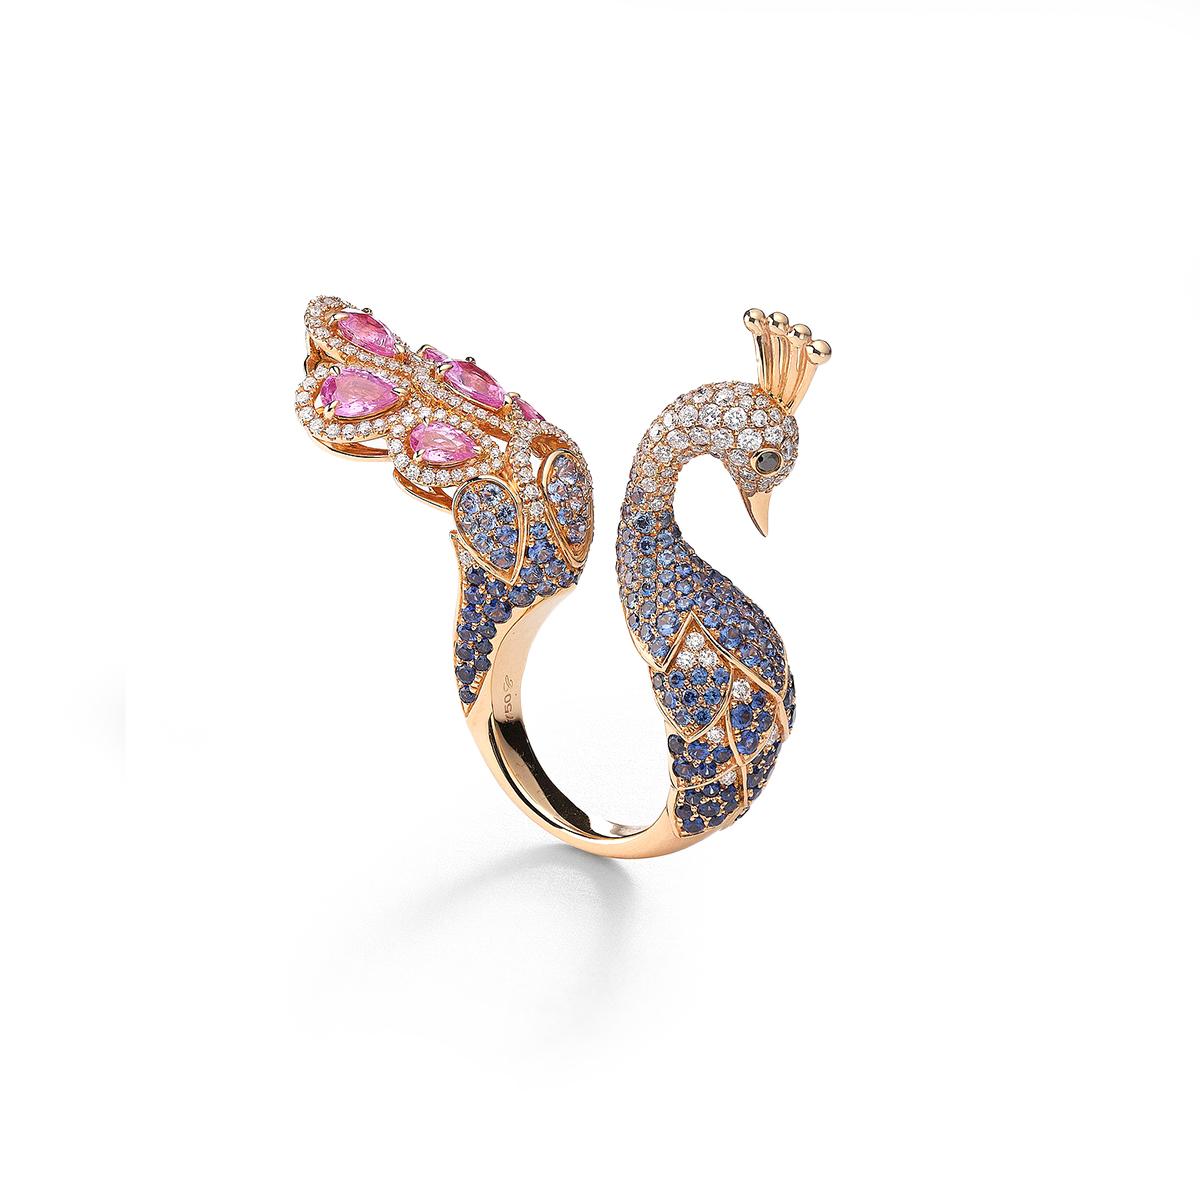 Peacok ring in 18kt pink gold set with 236 diamonds 1.69 cts, 6 pink pear-shaped sapphires 2.37 cts, 201 blue sapphires 3.39 cts and 2 black diamonds 0.04 cts Size 54   